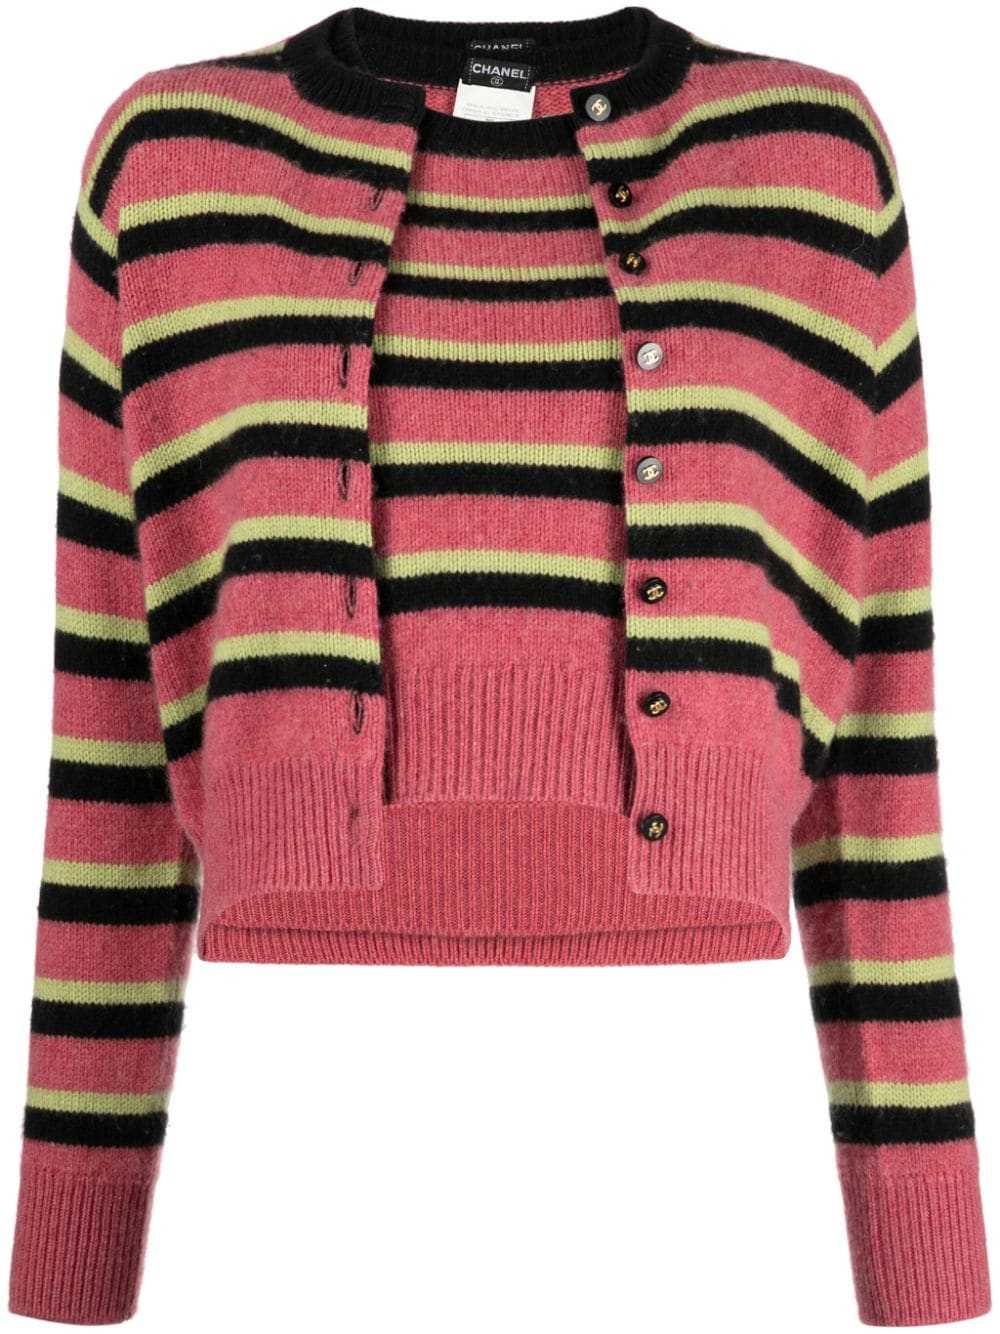 CHANEL Pre-Owned 1996 striped cashmere cardigan s… - image 1